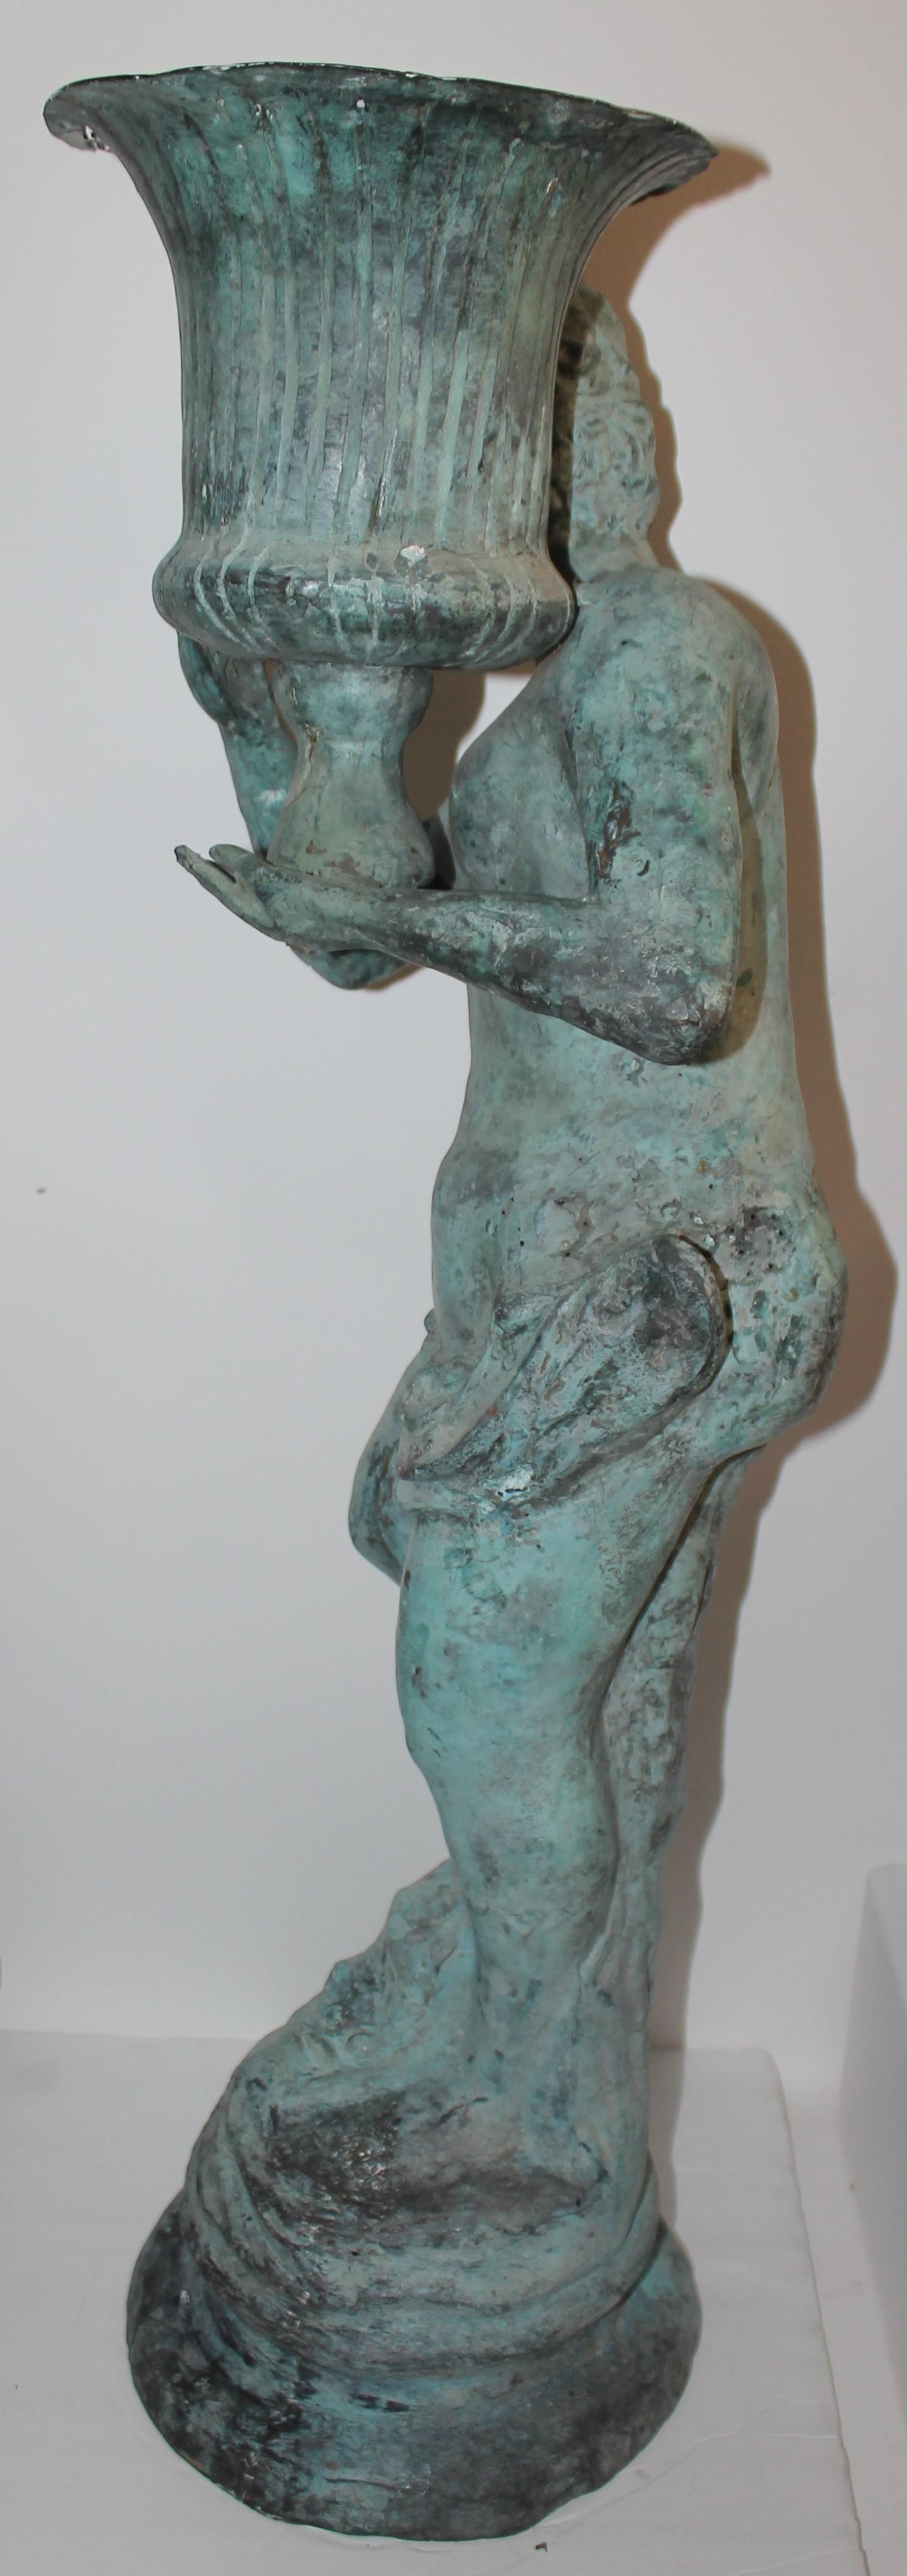 Bronze life sized statue of boy holding urn. 
There is a hole at the bottom that may be used as a water drain when being used as a garden planter. There is wear from age and use which has formed great patina. This item is in great condition. Circa